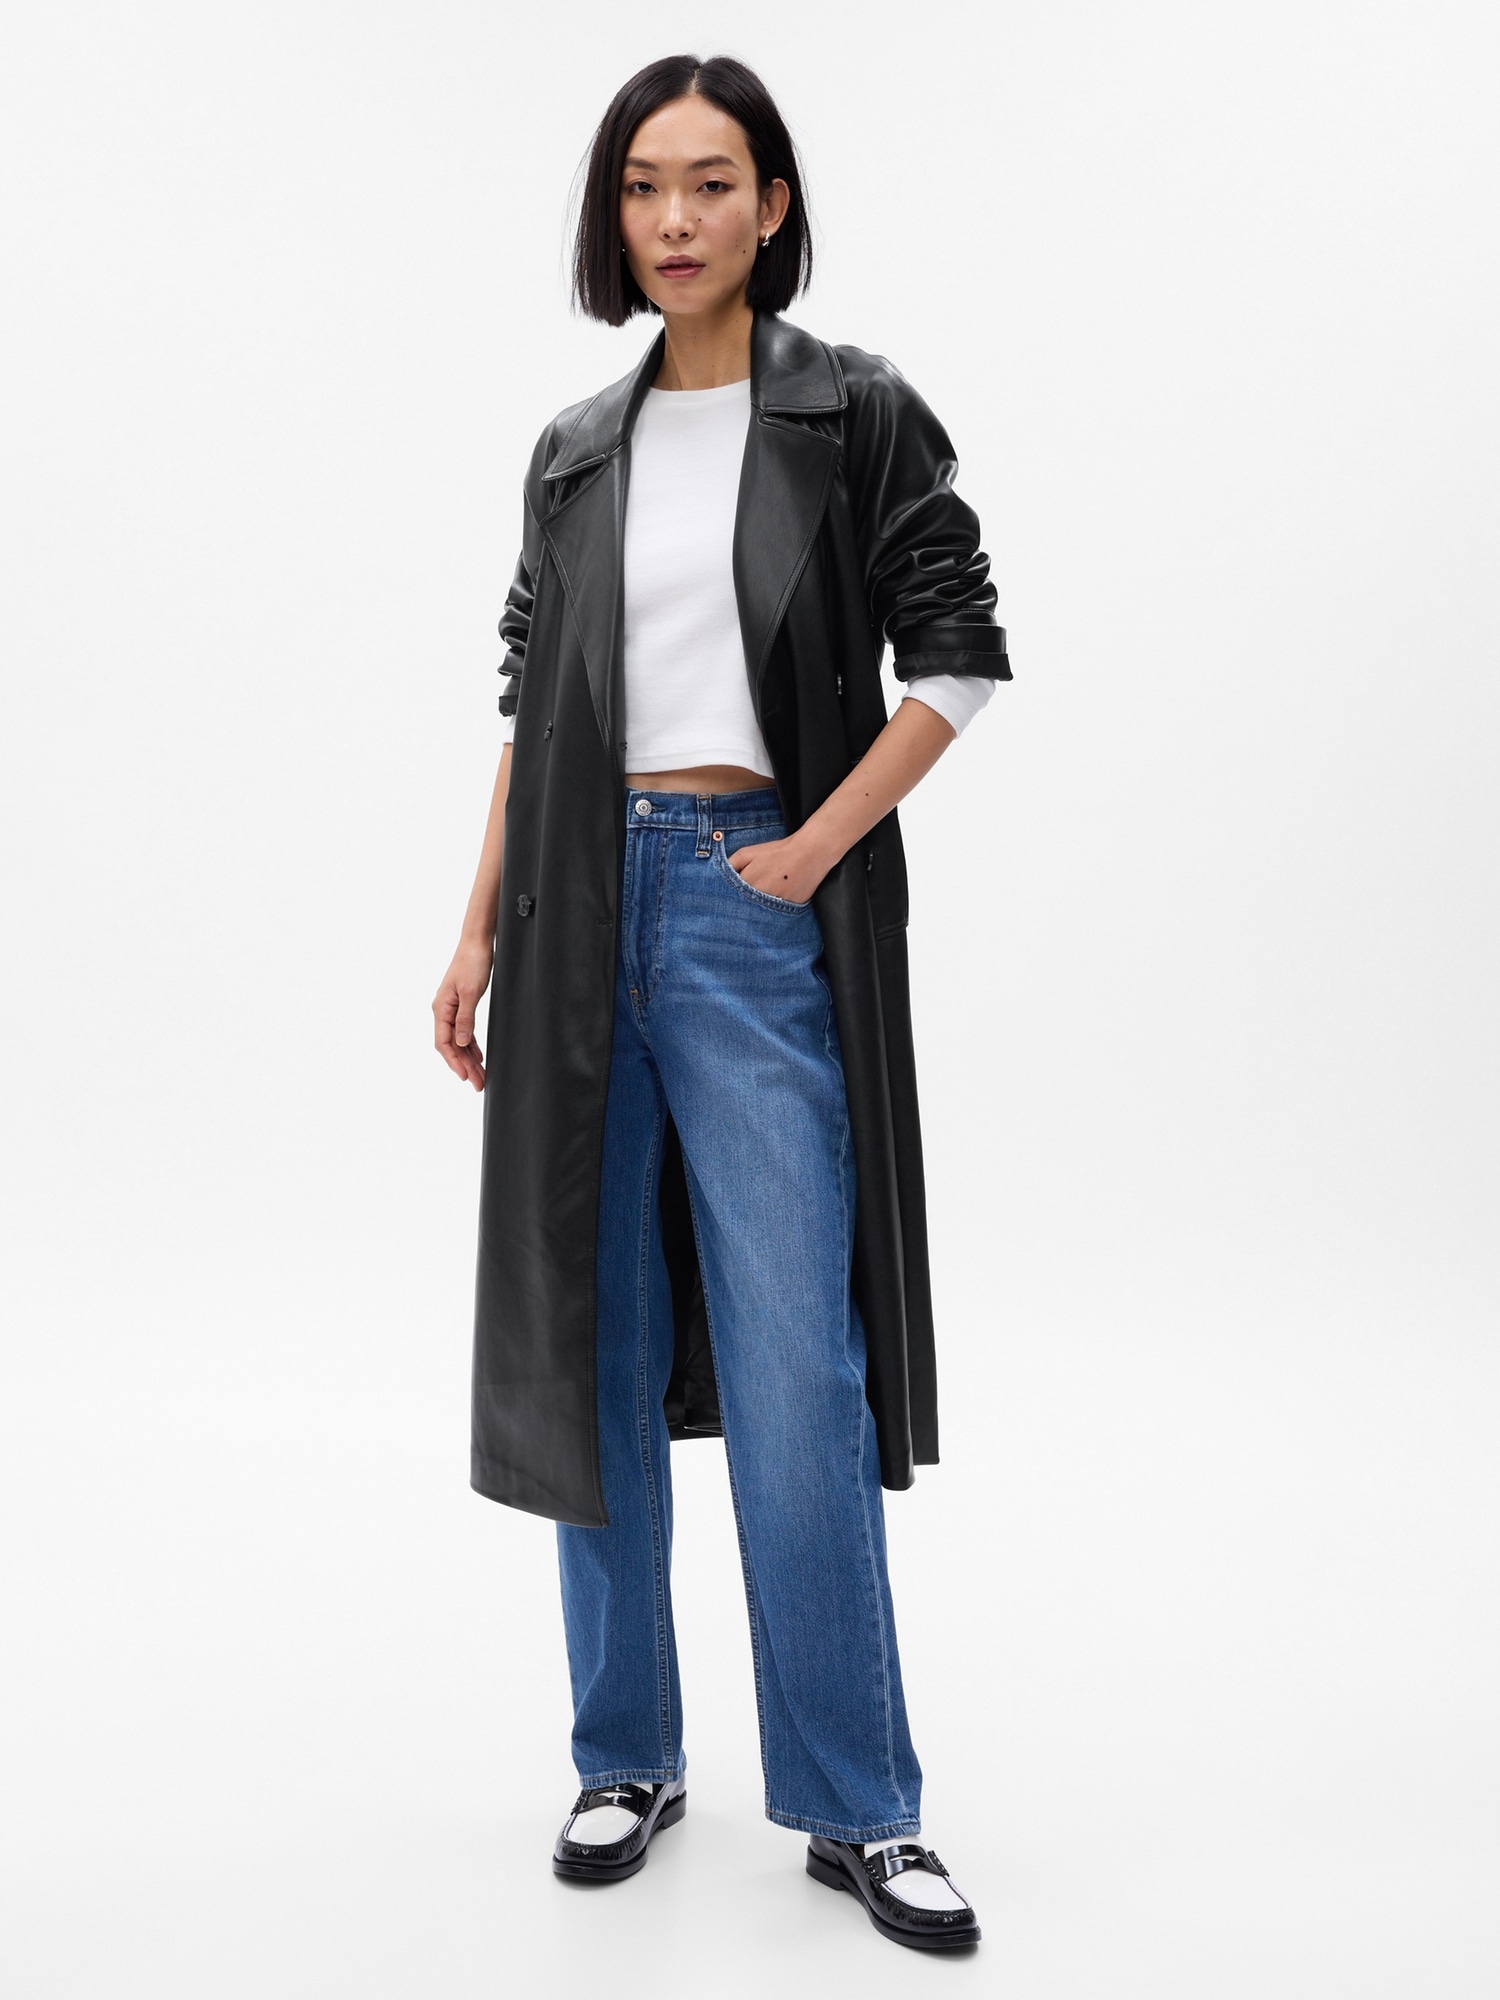 Leaher trench coat